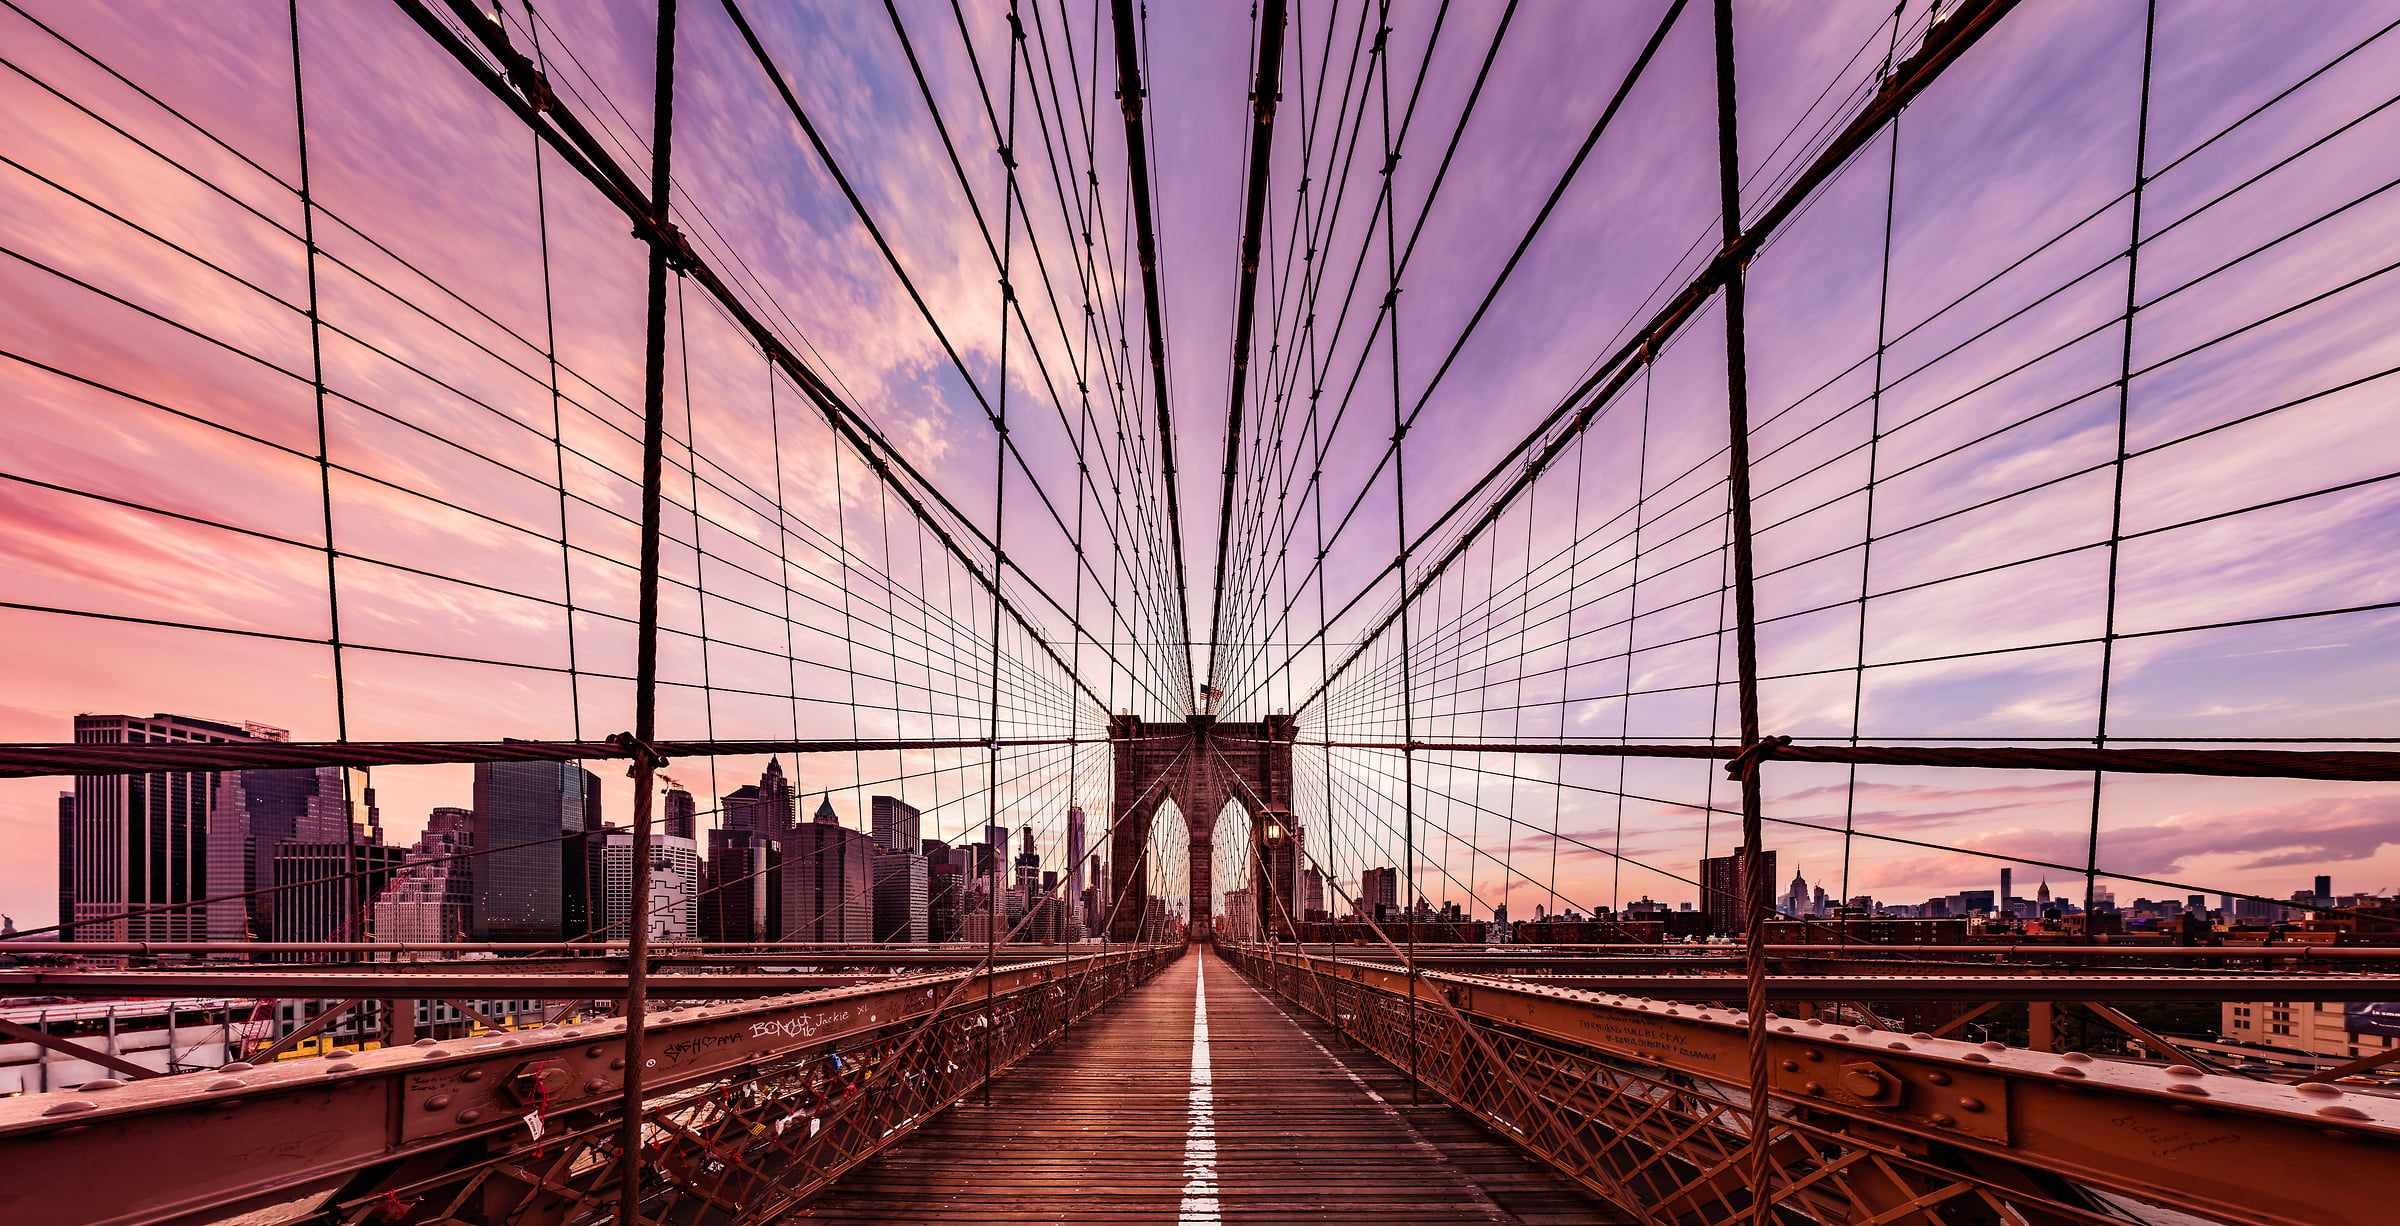 1,953 megapixels! The highest resolution VAST photo of the Brooklyn Bridge walkway path at sunset in New York City; created by Dan Piech